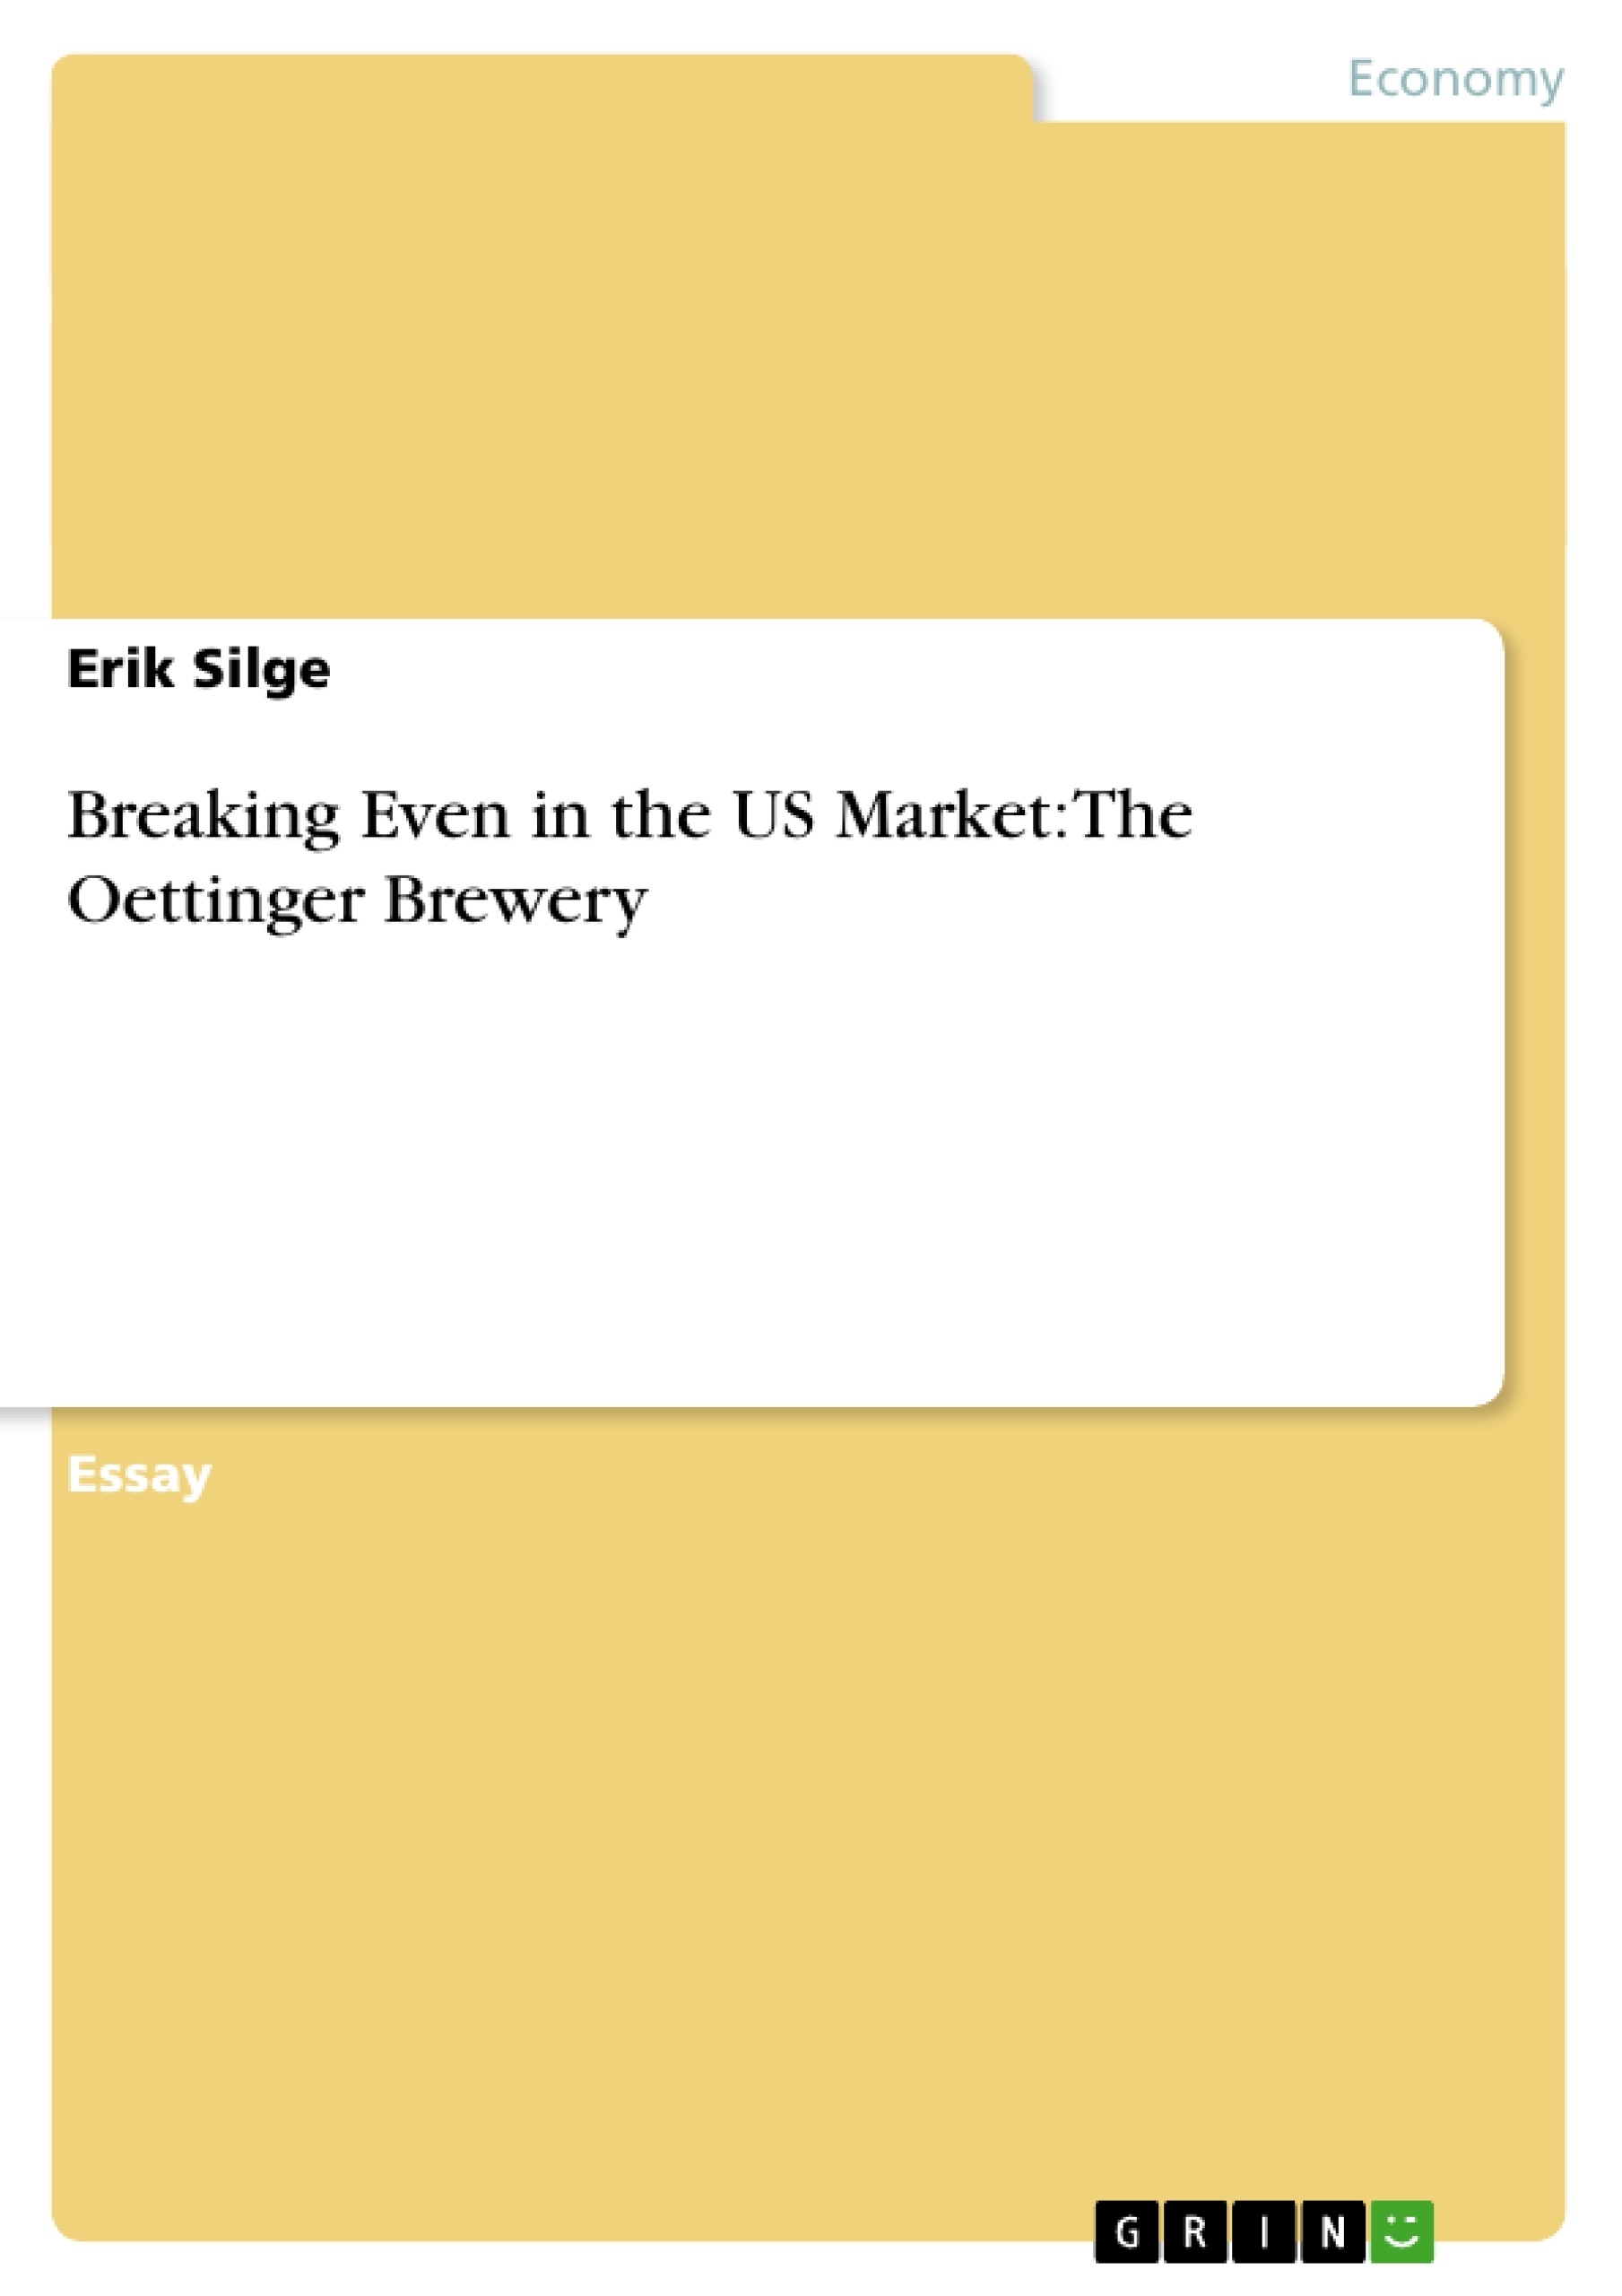 Título: Breaking Even in the US Market: The Oettinger Brewery